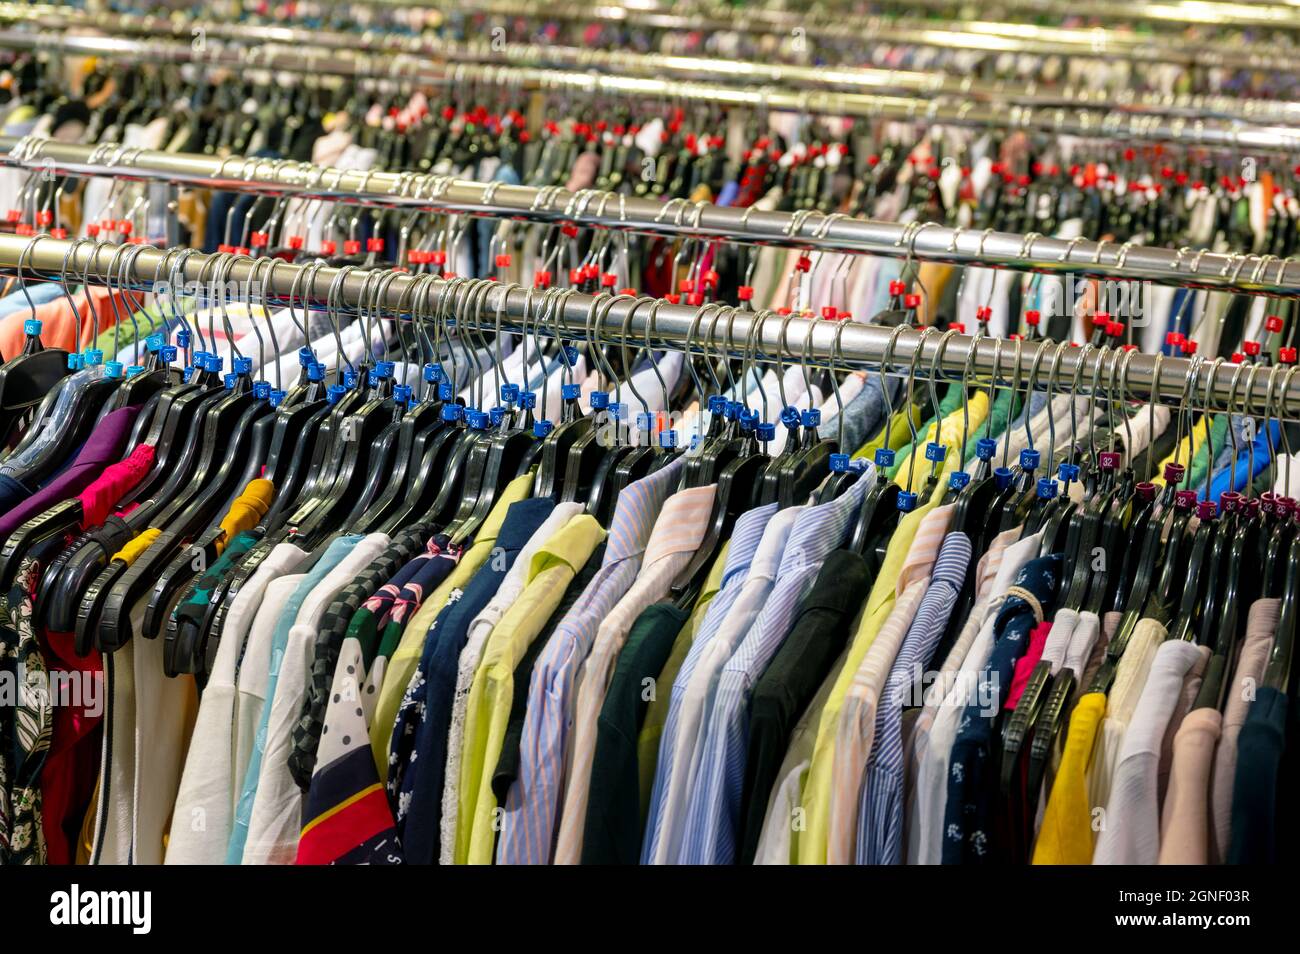 Shirts, blouses and vests on a clothes rack. Stock Photo